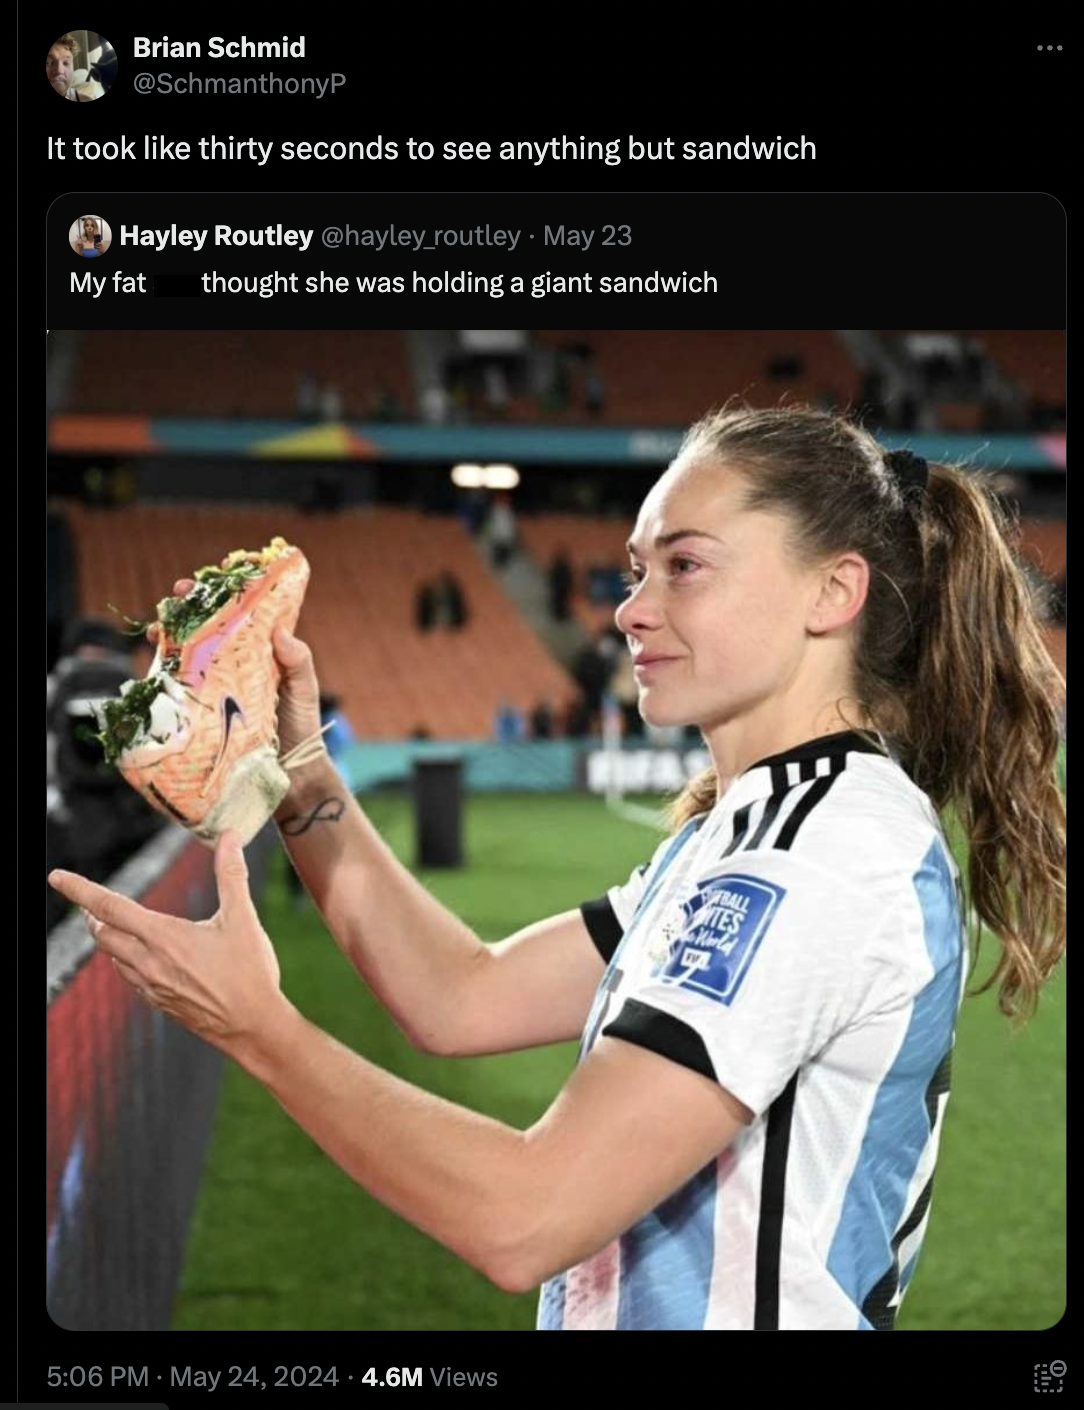 Optical illusion - Brian Schmid It took thirty seconds to see anything but sandwich Hayley Routley May 23 My fat thought she was holding a giant sandwich 4.6M Views